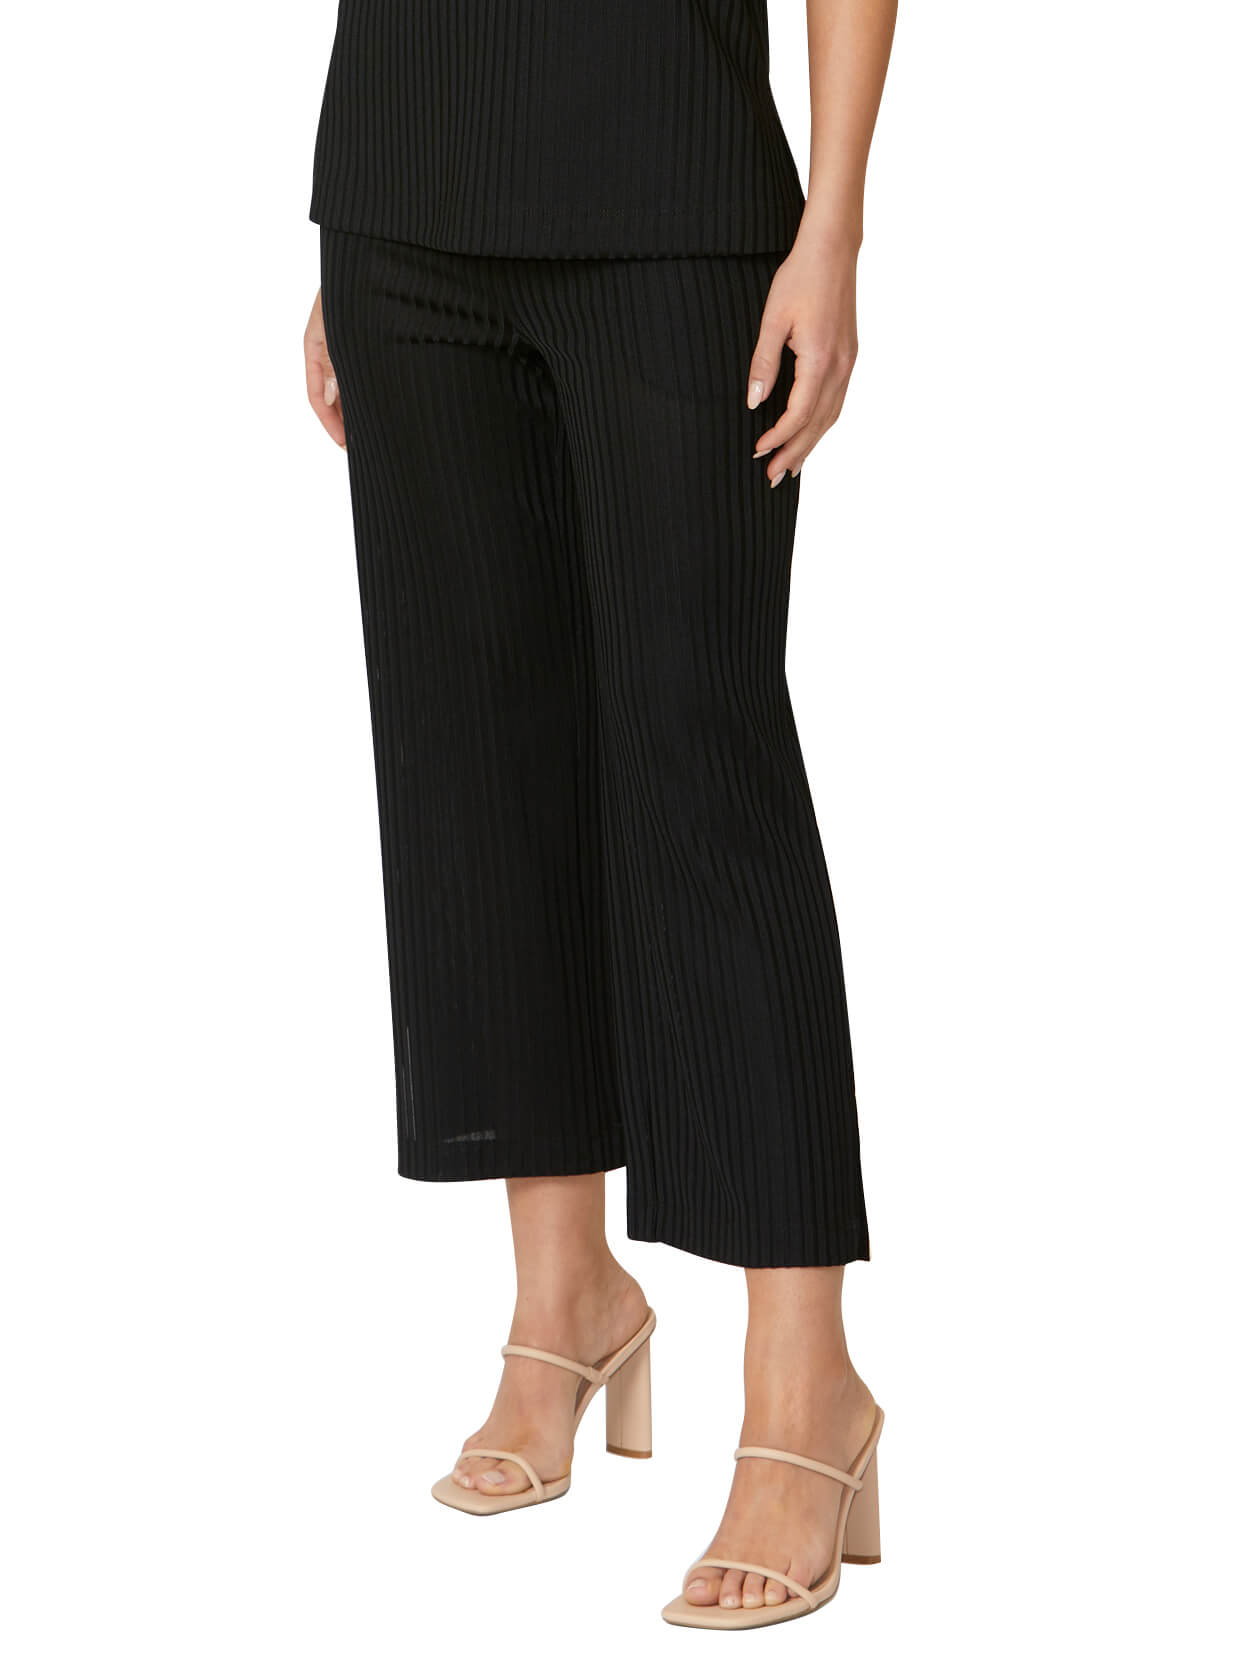 Carrie Black Cropped Pant